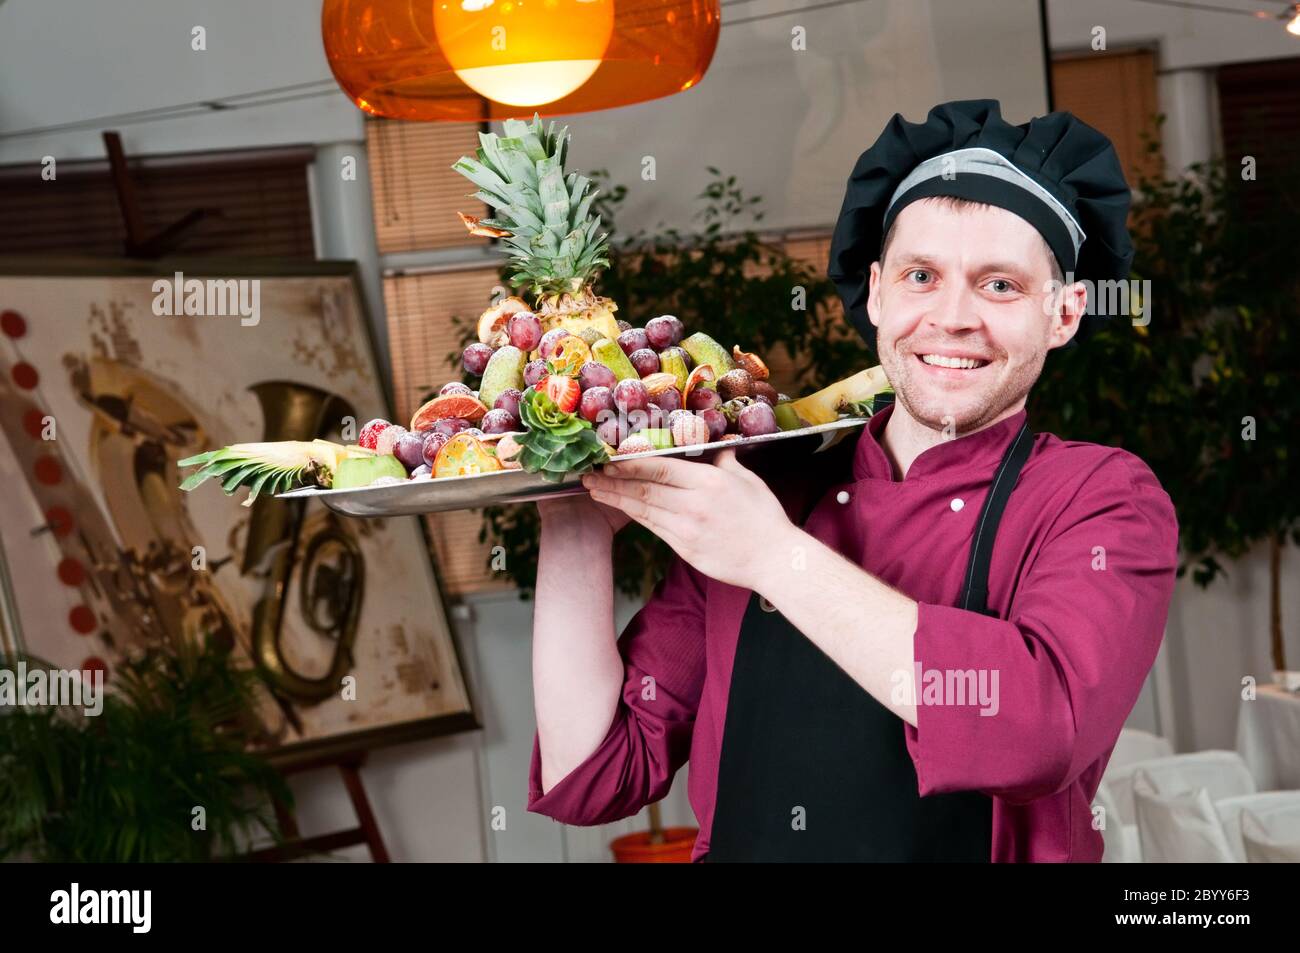 Cheerful chef cook with fruits Stock Photo